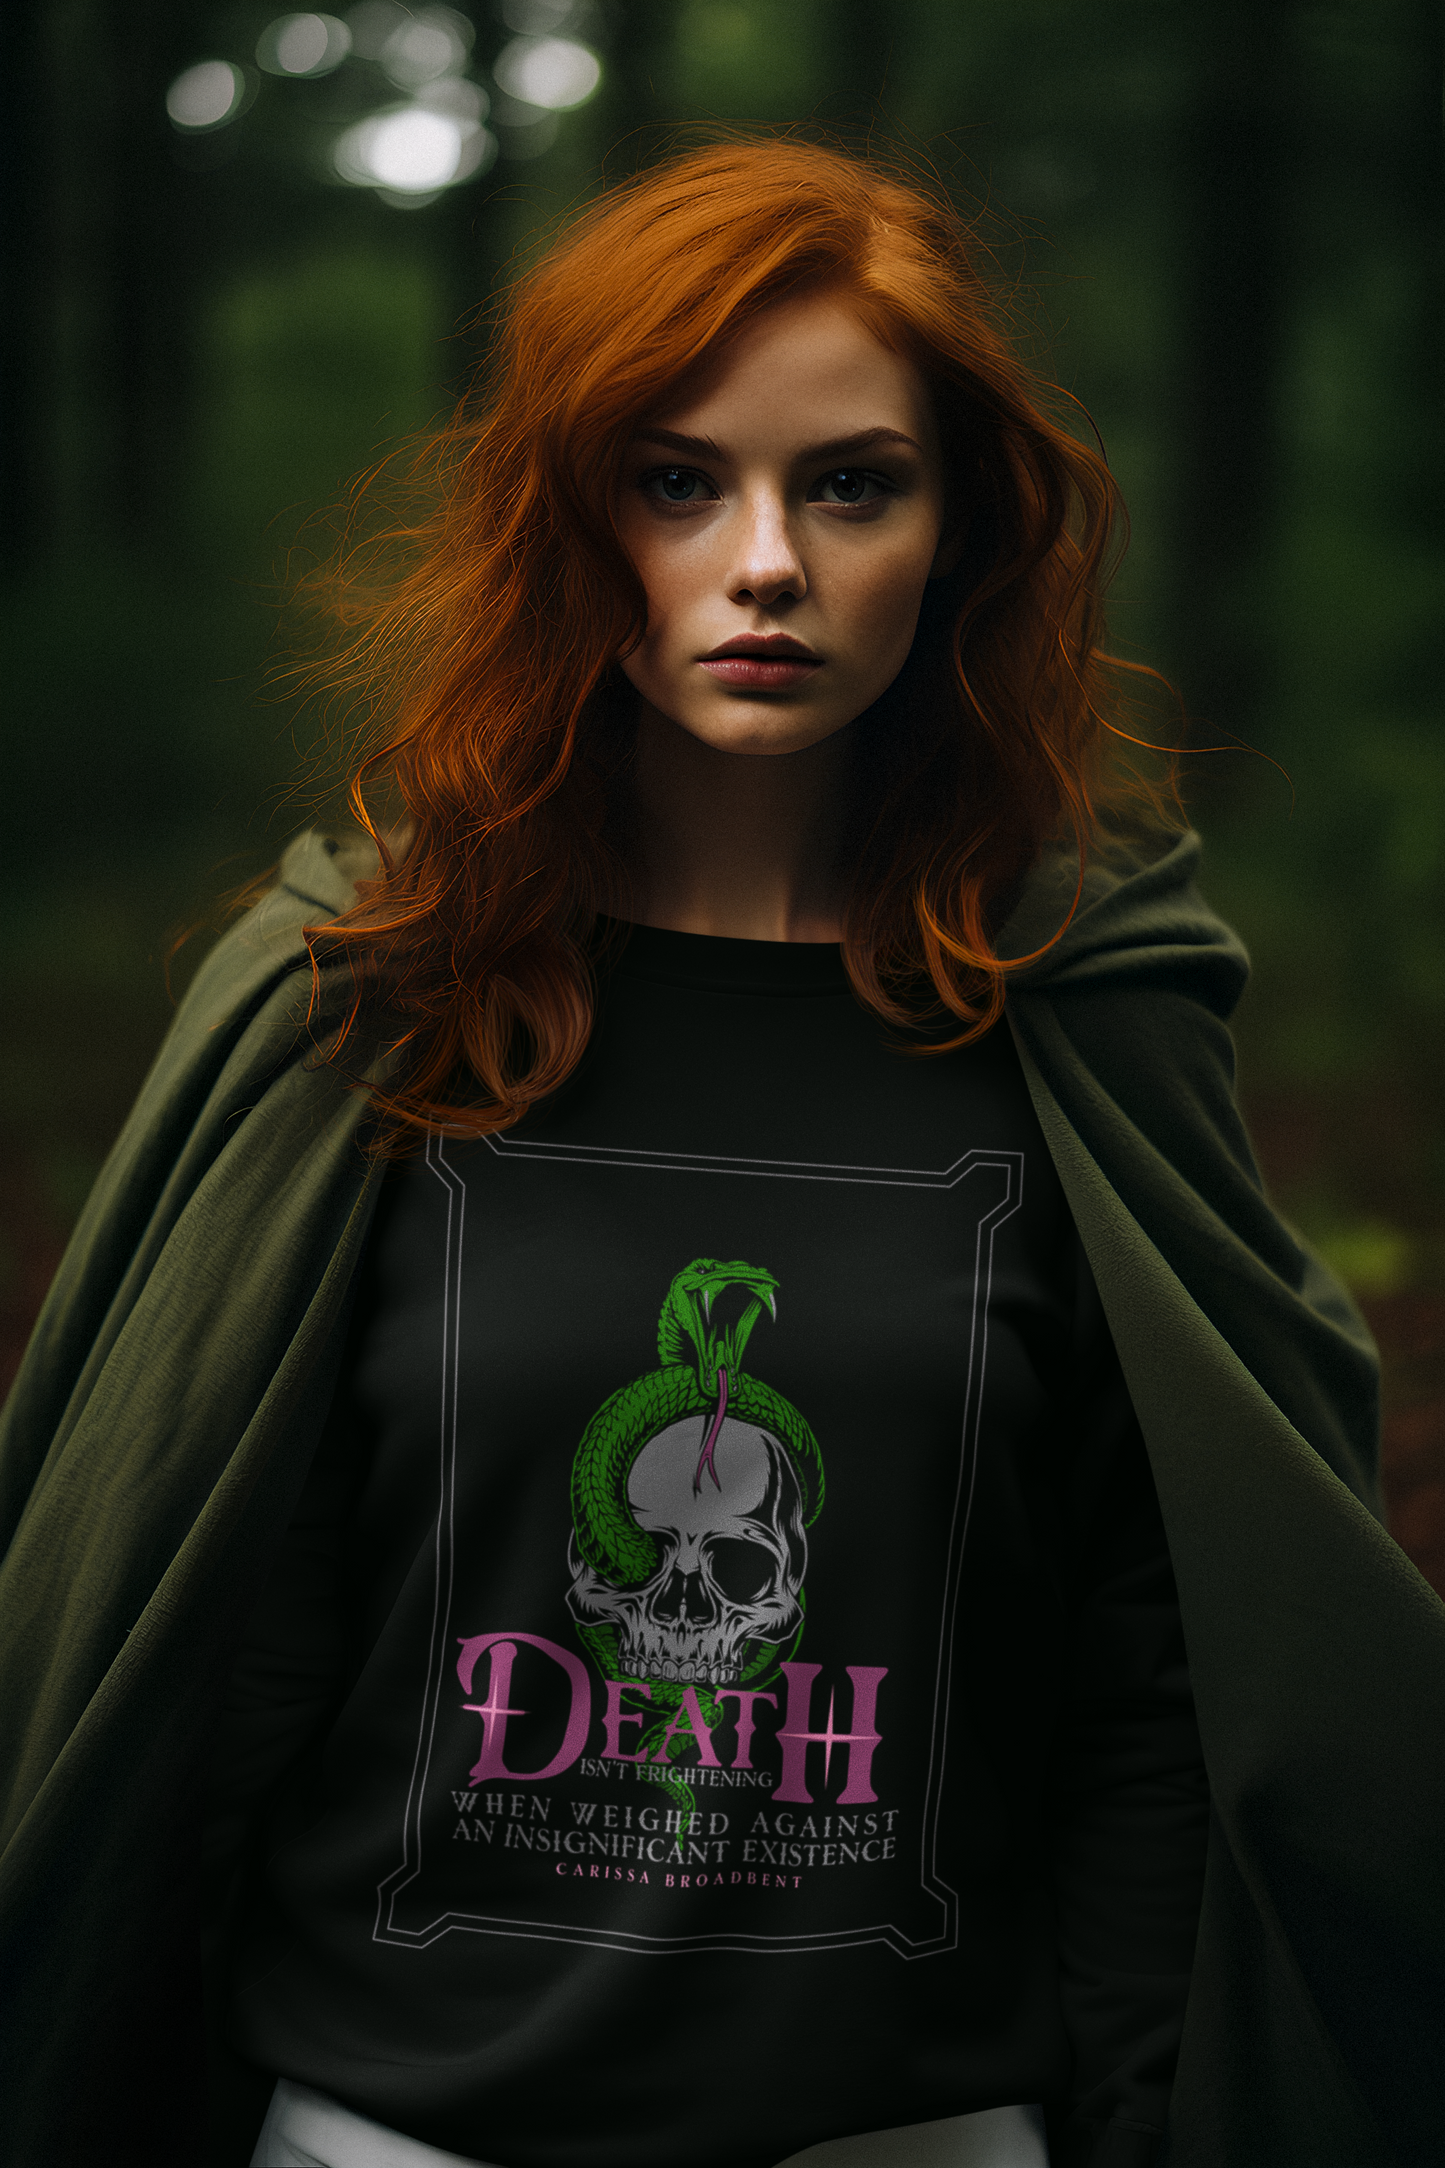 Death isn't Frightening - Carissa Broadbent - Officially Licensed - Sweatshirt - Serpent and The Wings of Night